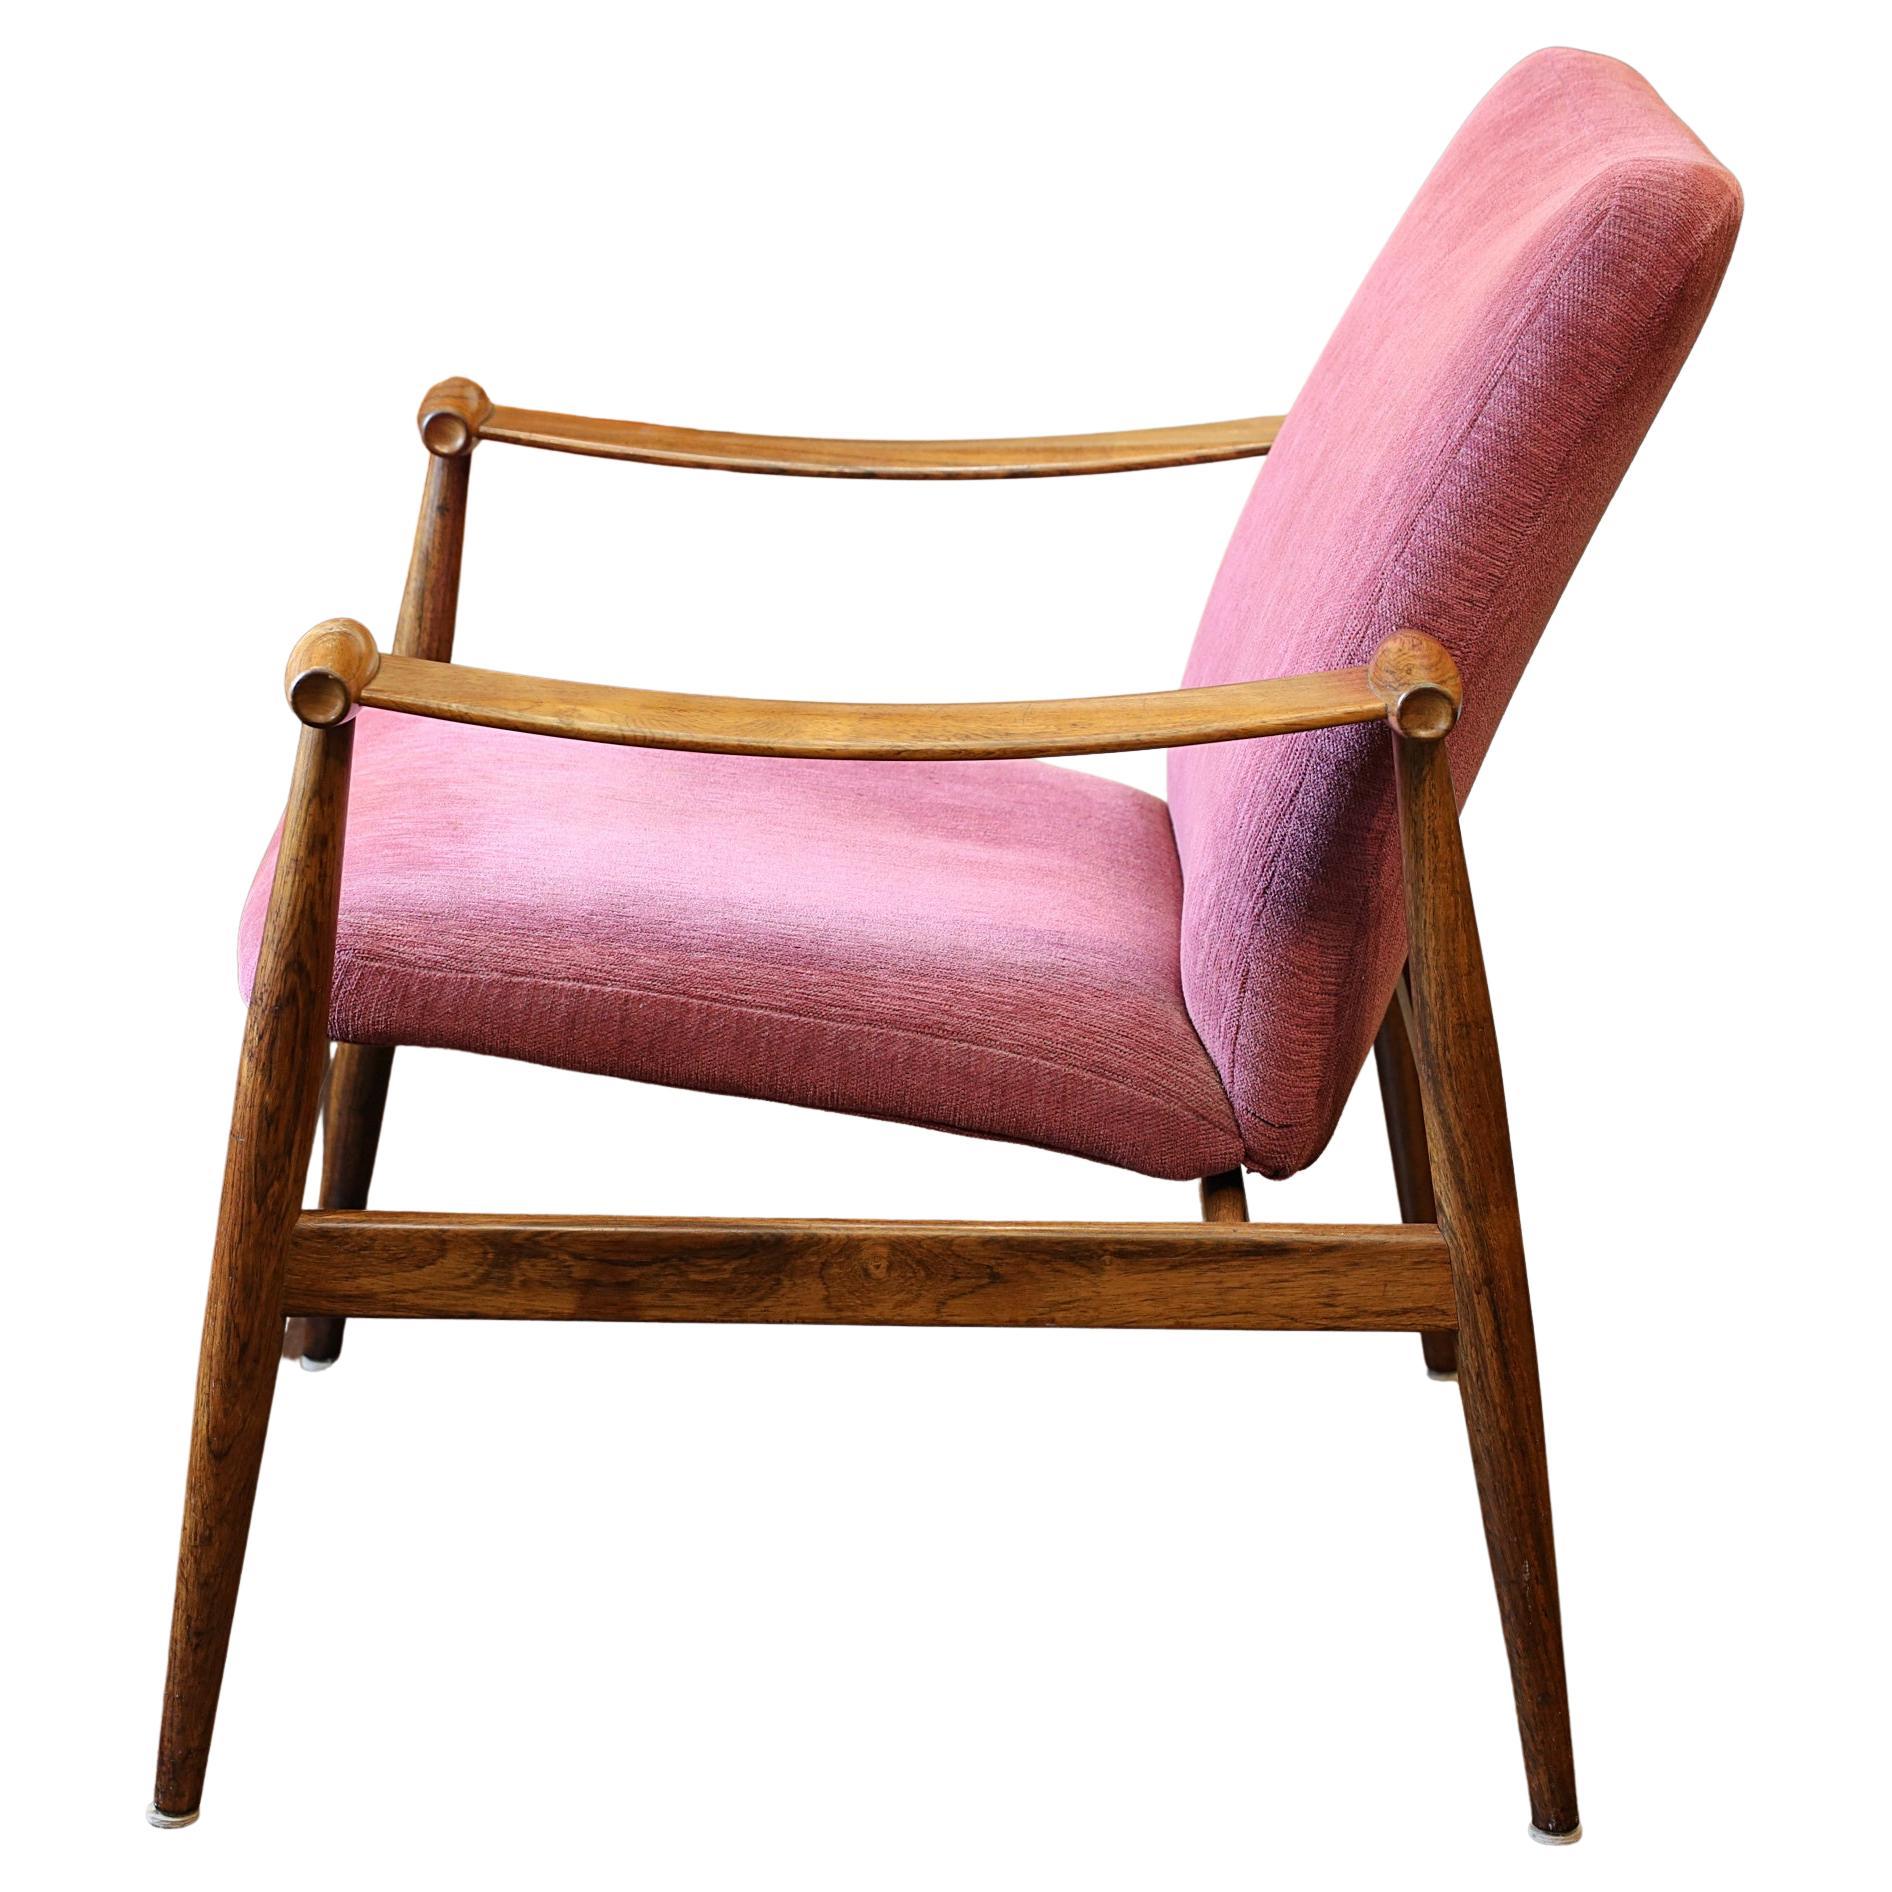 Iconic "Spade Chair" Designed by Finn Juhl, Model 133, Rare Rosewood Chair